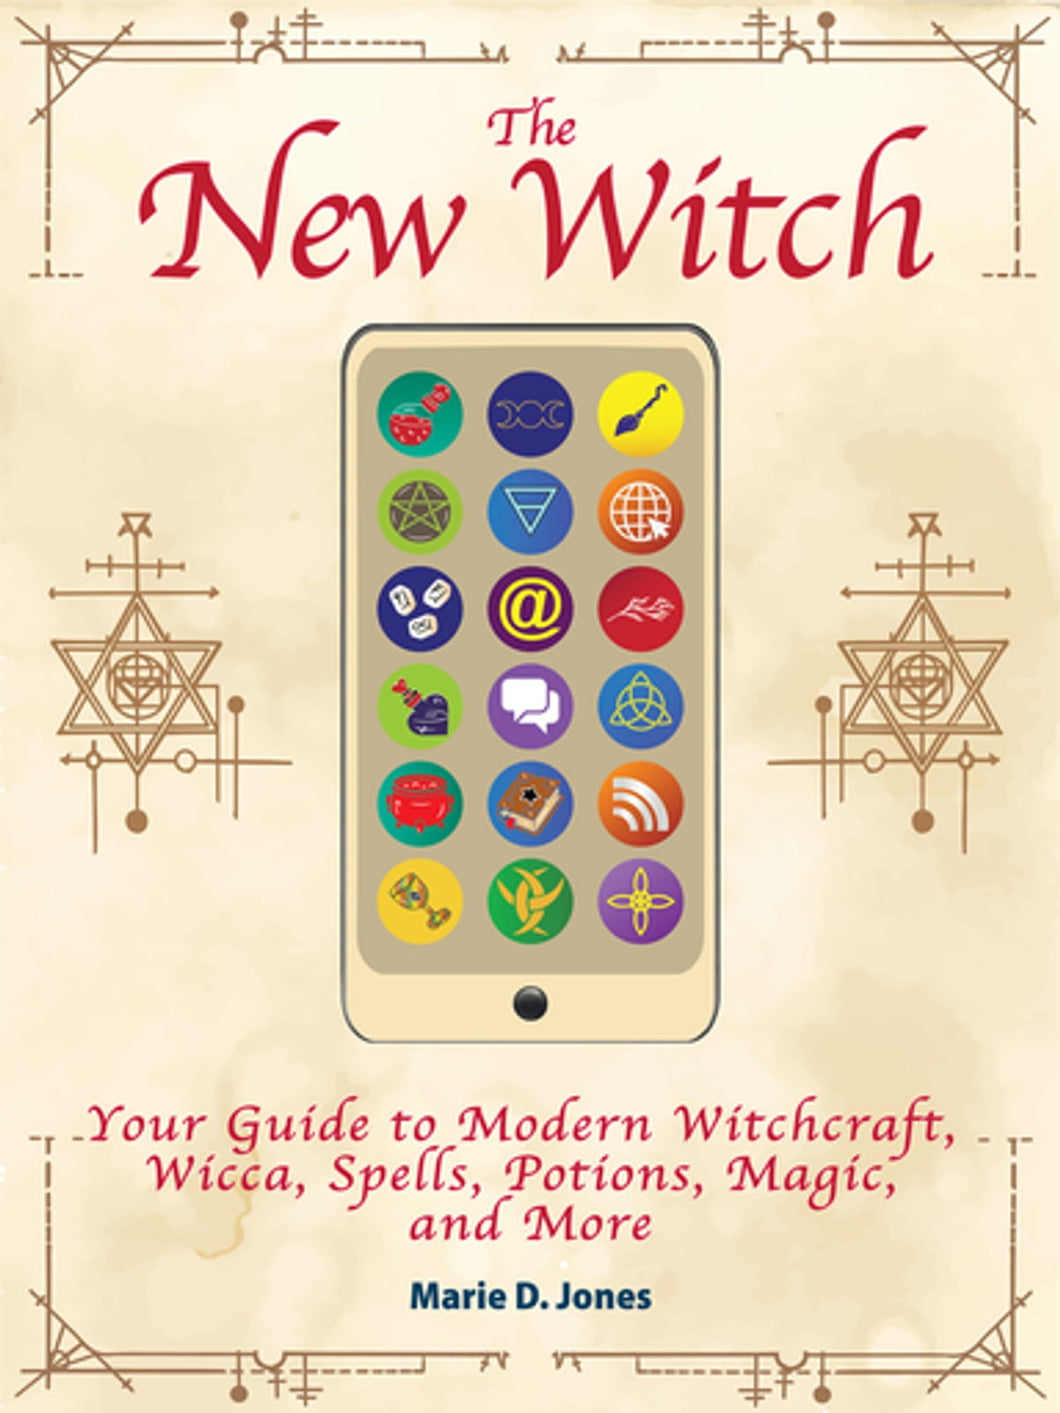 The New Witch - Your Guide to Modern Witchcraft, Wicca, Spells, Potions, Magic, and More